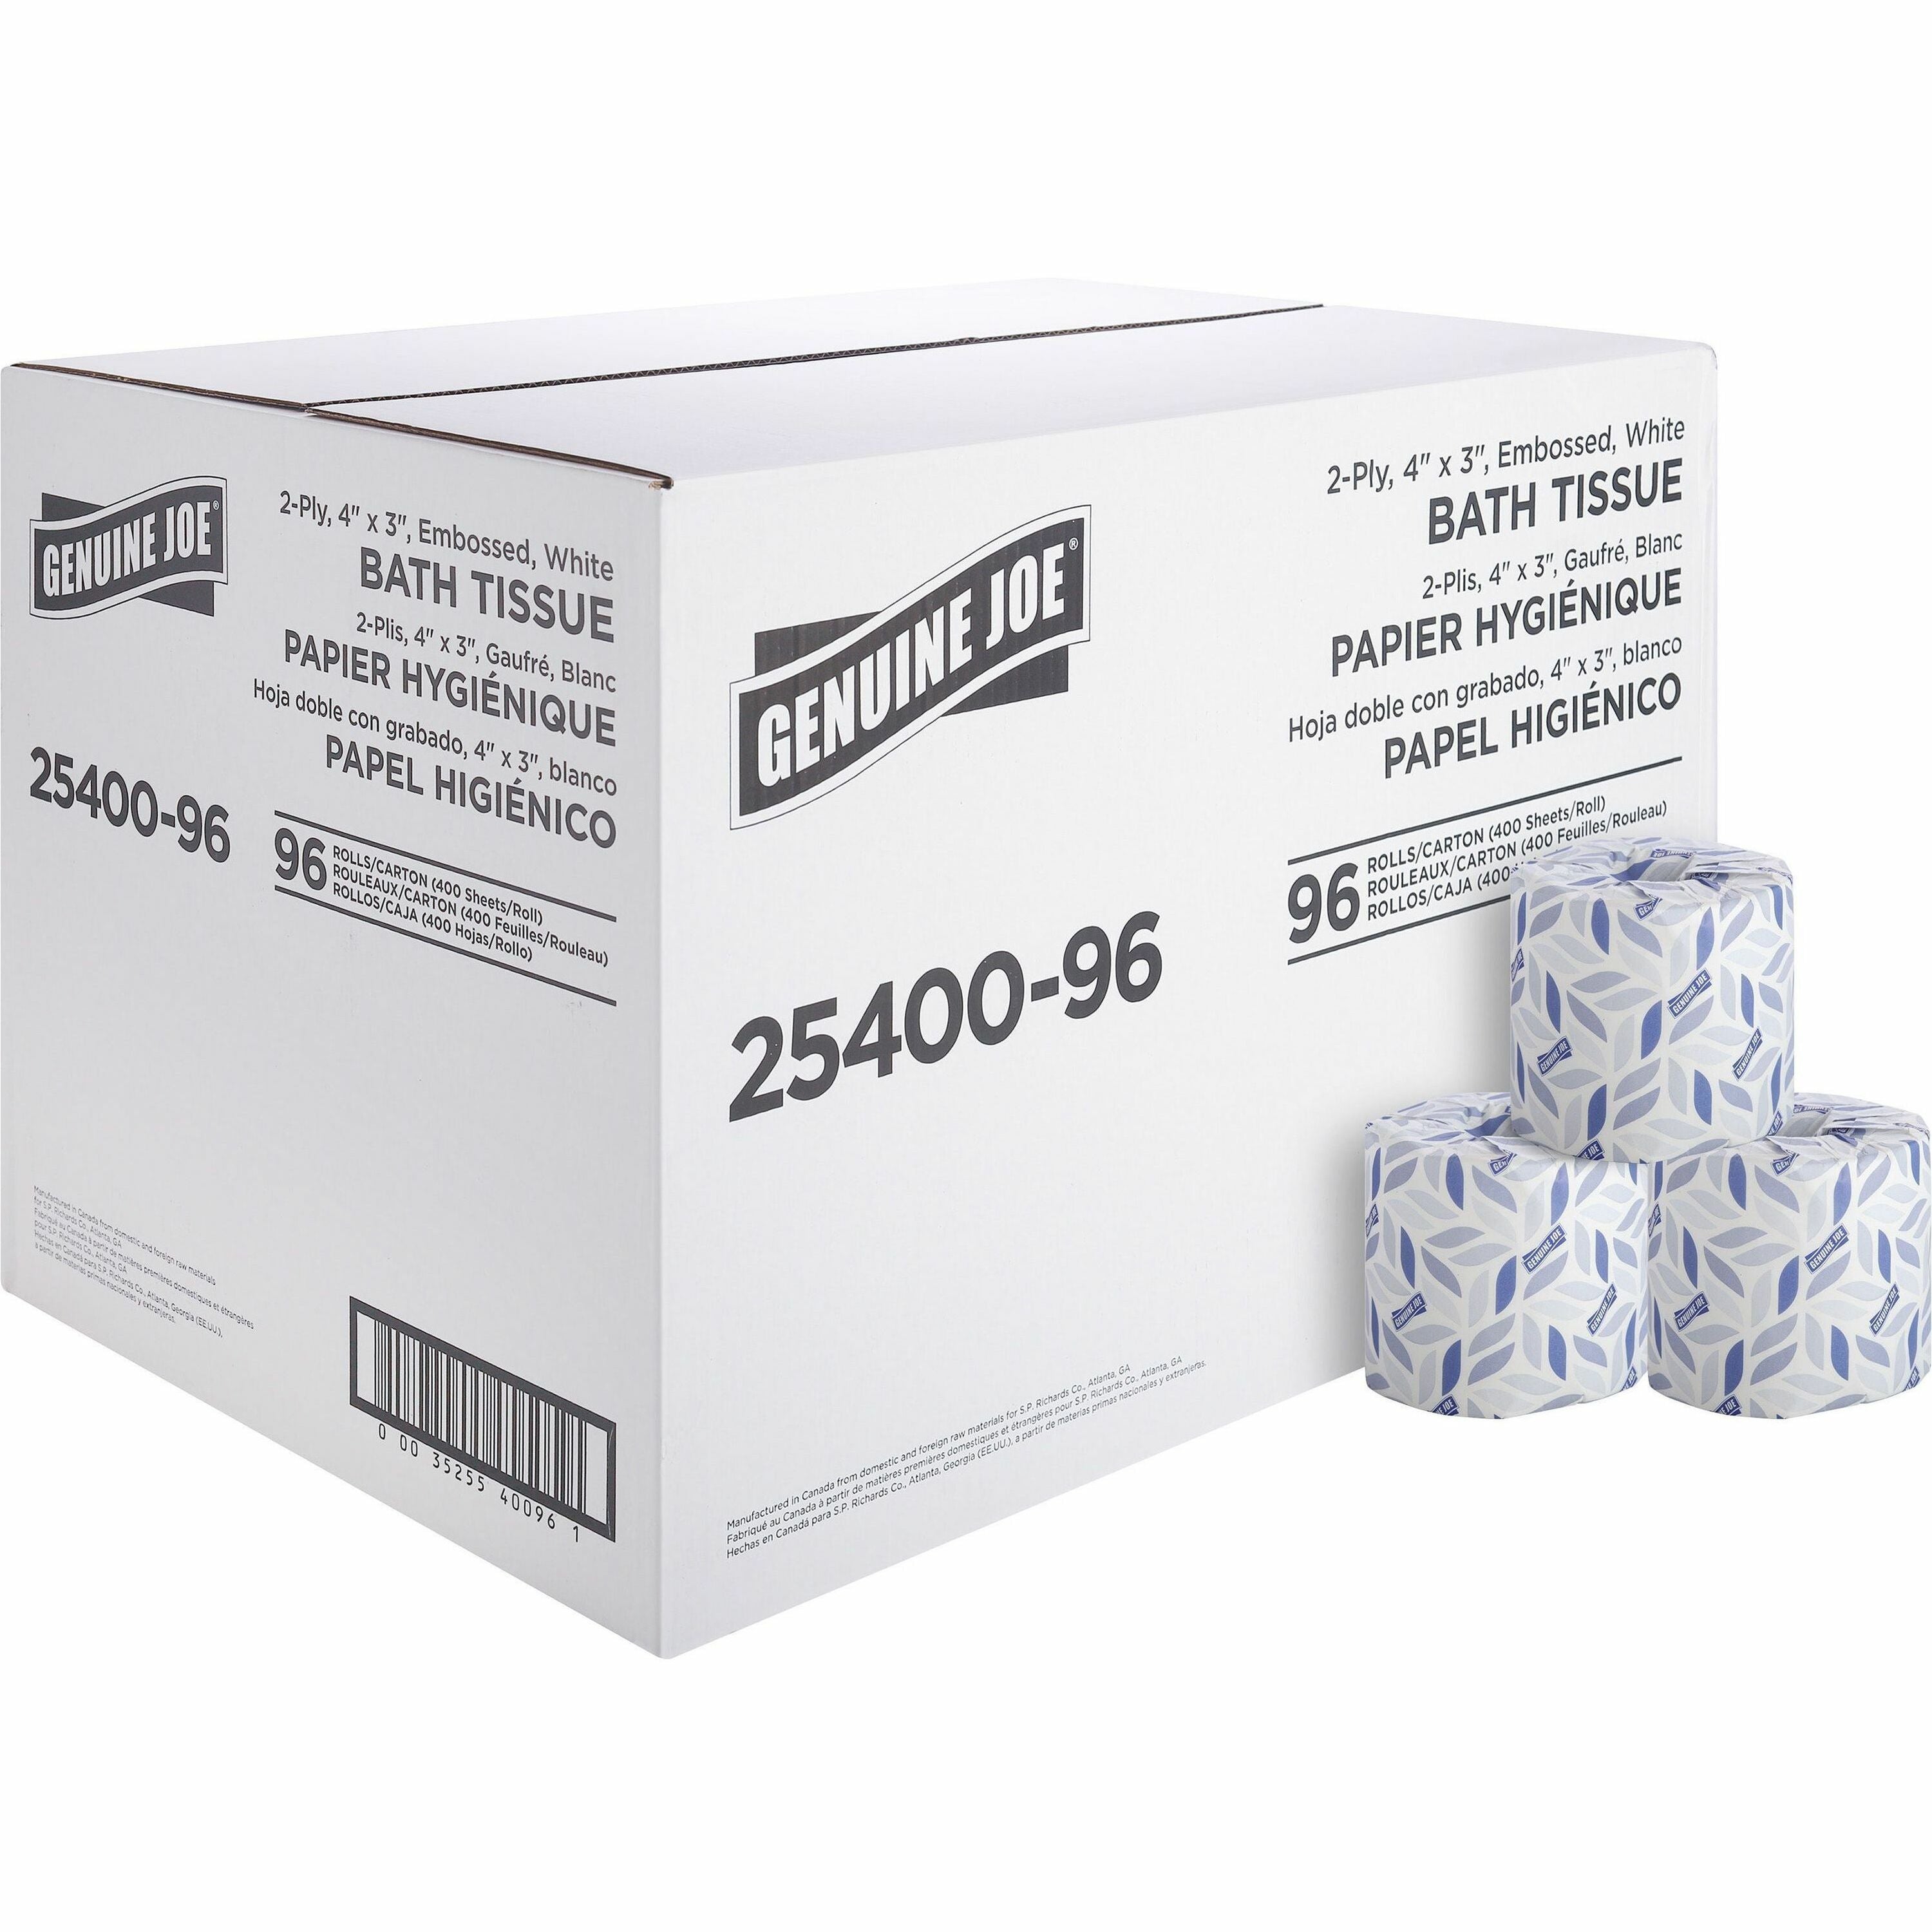 genuine-joe-2-ply-standard-bath-tissue-rolls-2-ply-3-x-4-400-sheets-roll-163-core-white-perforated-absorbent-soft-embossed-for-restroom-96-carton_gjo2540096 - 1